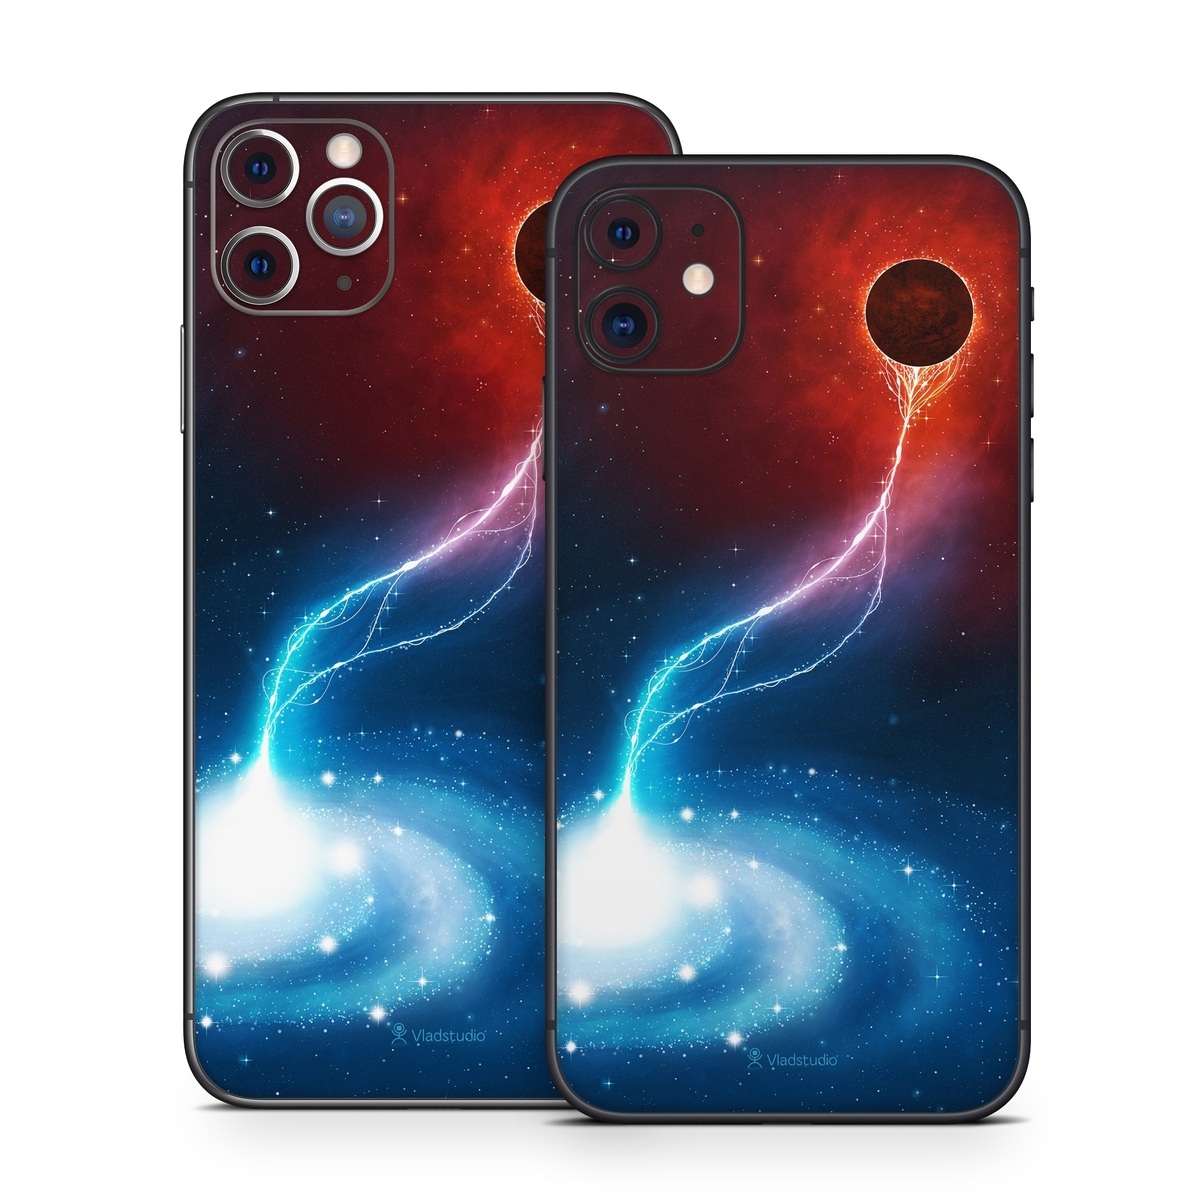 iPhone 11 Skin design of Outer space, Atmosphere, Astronomical object, Universe, Space, Sky, Planet, Astronomy, Celestial event, Galaxy, with blue, red, black colors